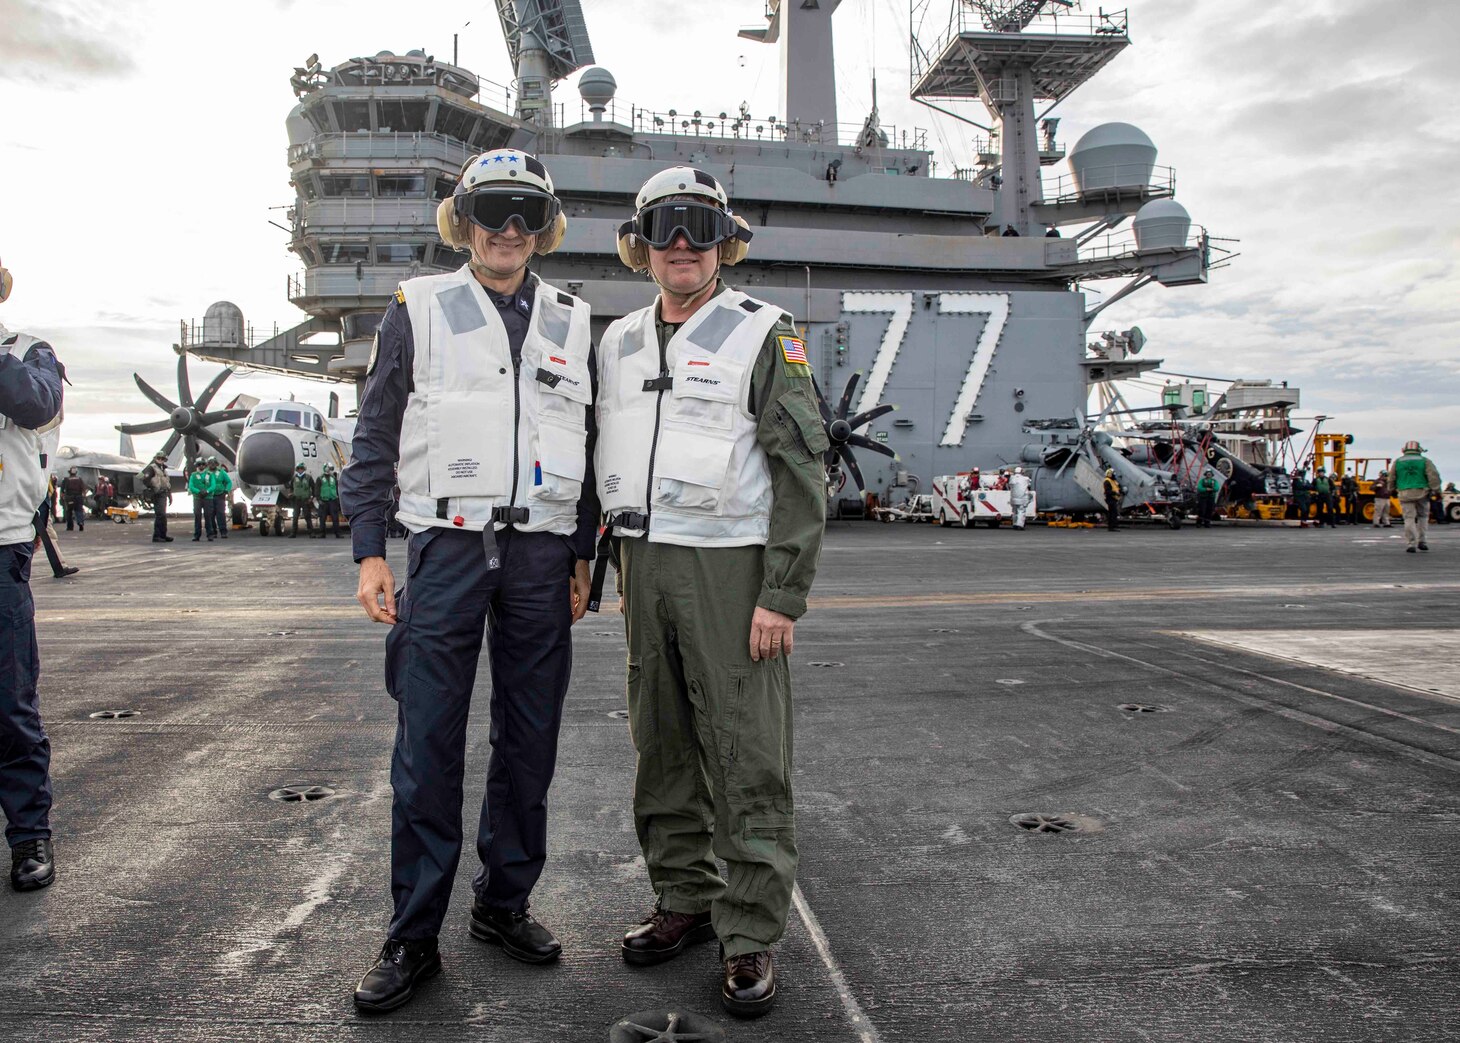 Vice Adm. Thomas Ishee, commander, U.S. Sixth Fleet, and commander, Naval Striking and Support Forces NATO, right, and Vice Adm. Aurelio De Carolis, commander, Italian Naval Fleet, pose for a photo aboard the Nimitz-class aircraft carrier USS George H.W. Bush (CVN 77) during a distinguished visitor embark on the ship, Dec. 15, 2022.